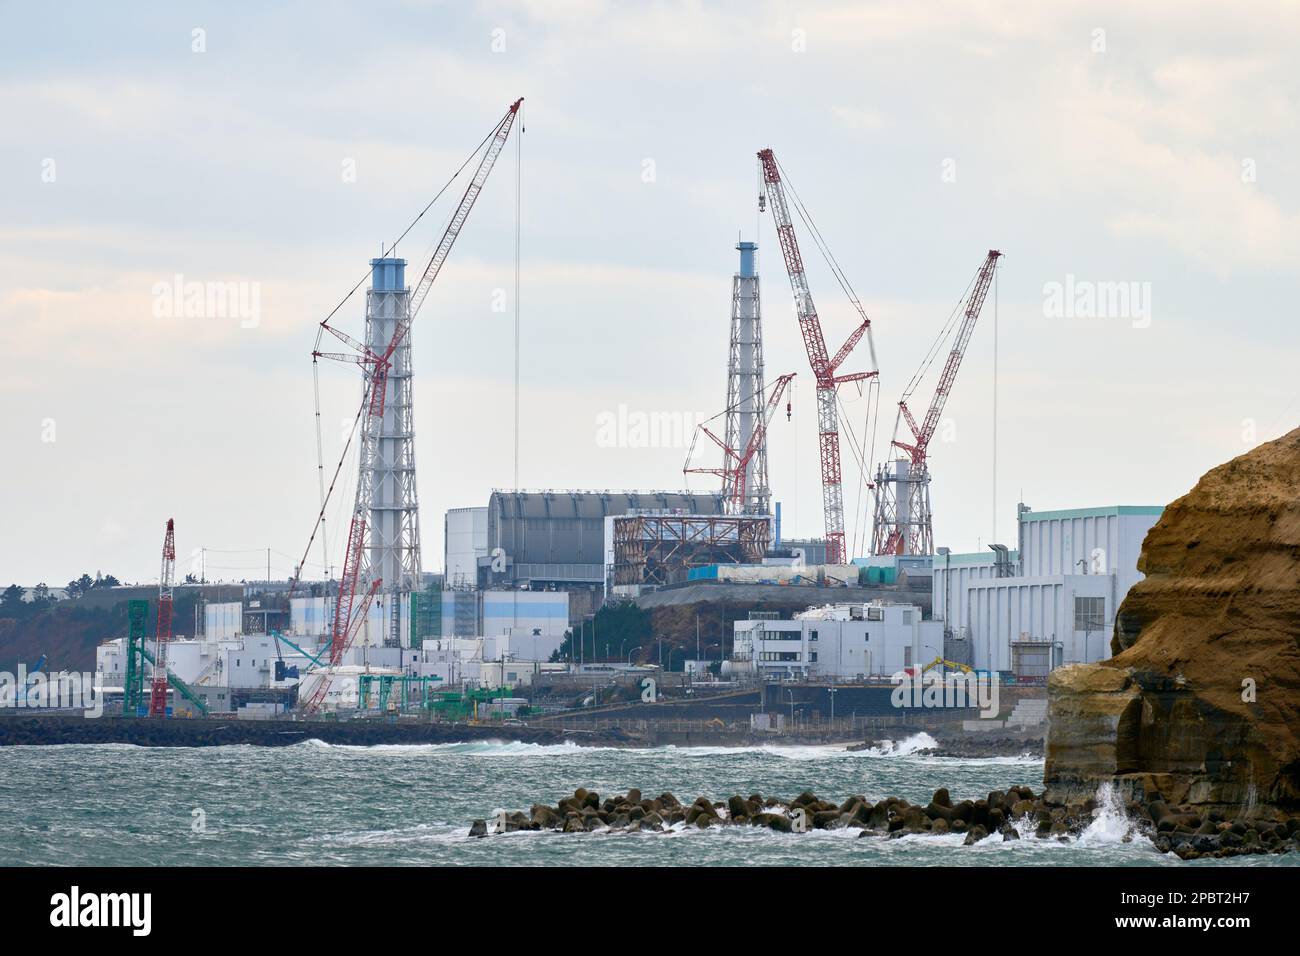 (230313) -- FUKUSHIMA, March 13, 2023 (Xinhua) -- This photo taken on March 6, 2023 shows the Fukushima Daiichi nuclear power plant in Futabacho, Futabagun of Fukushima Prefecture, Japan. Struck by a magnitude-9.0 earthquake and ensuing tsunami that hit Japan's northeast on March 11, 2011, the power plant suffered core meltdowns, resulting in a level-7 nuclear accident, the highest on the International Nuclear and Radiological Event Scale. Twelve years after the 2011 accident traumatized Fukushima's fishing industry, local fishermen are still struggling for recovery. As Japan pushes ahead w Stock Photo